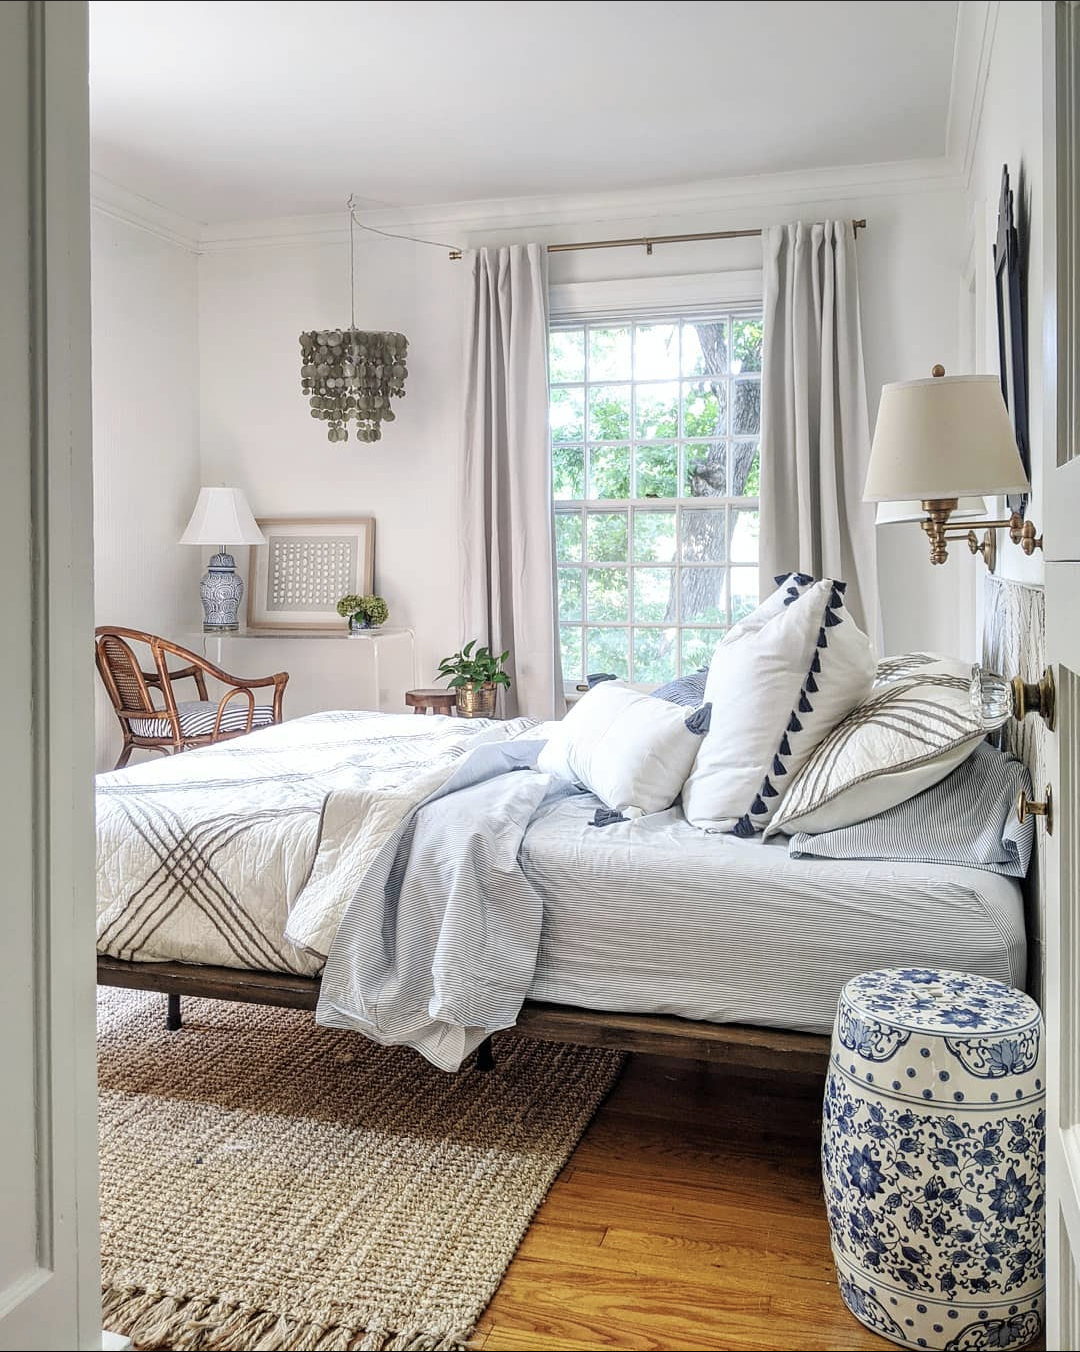 Hosting visitors for the first time in ages? Here's how to prep your guest room